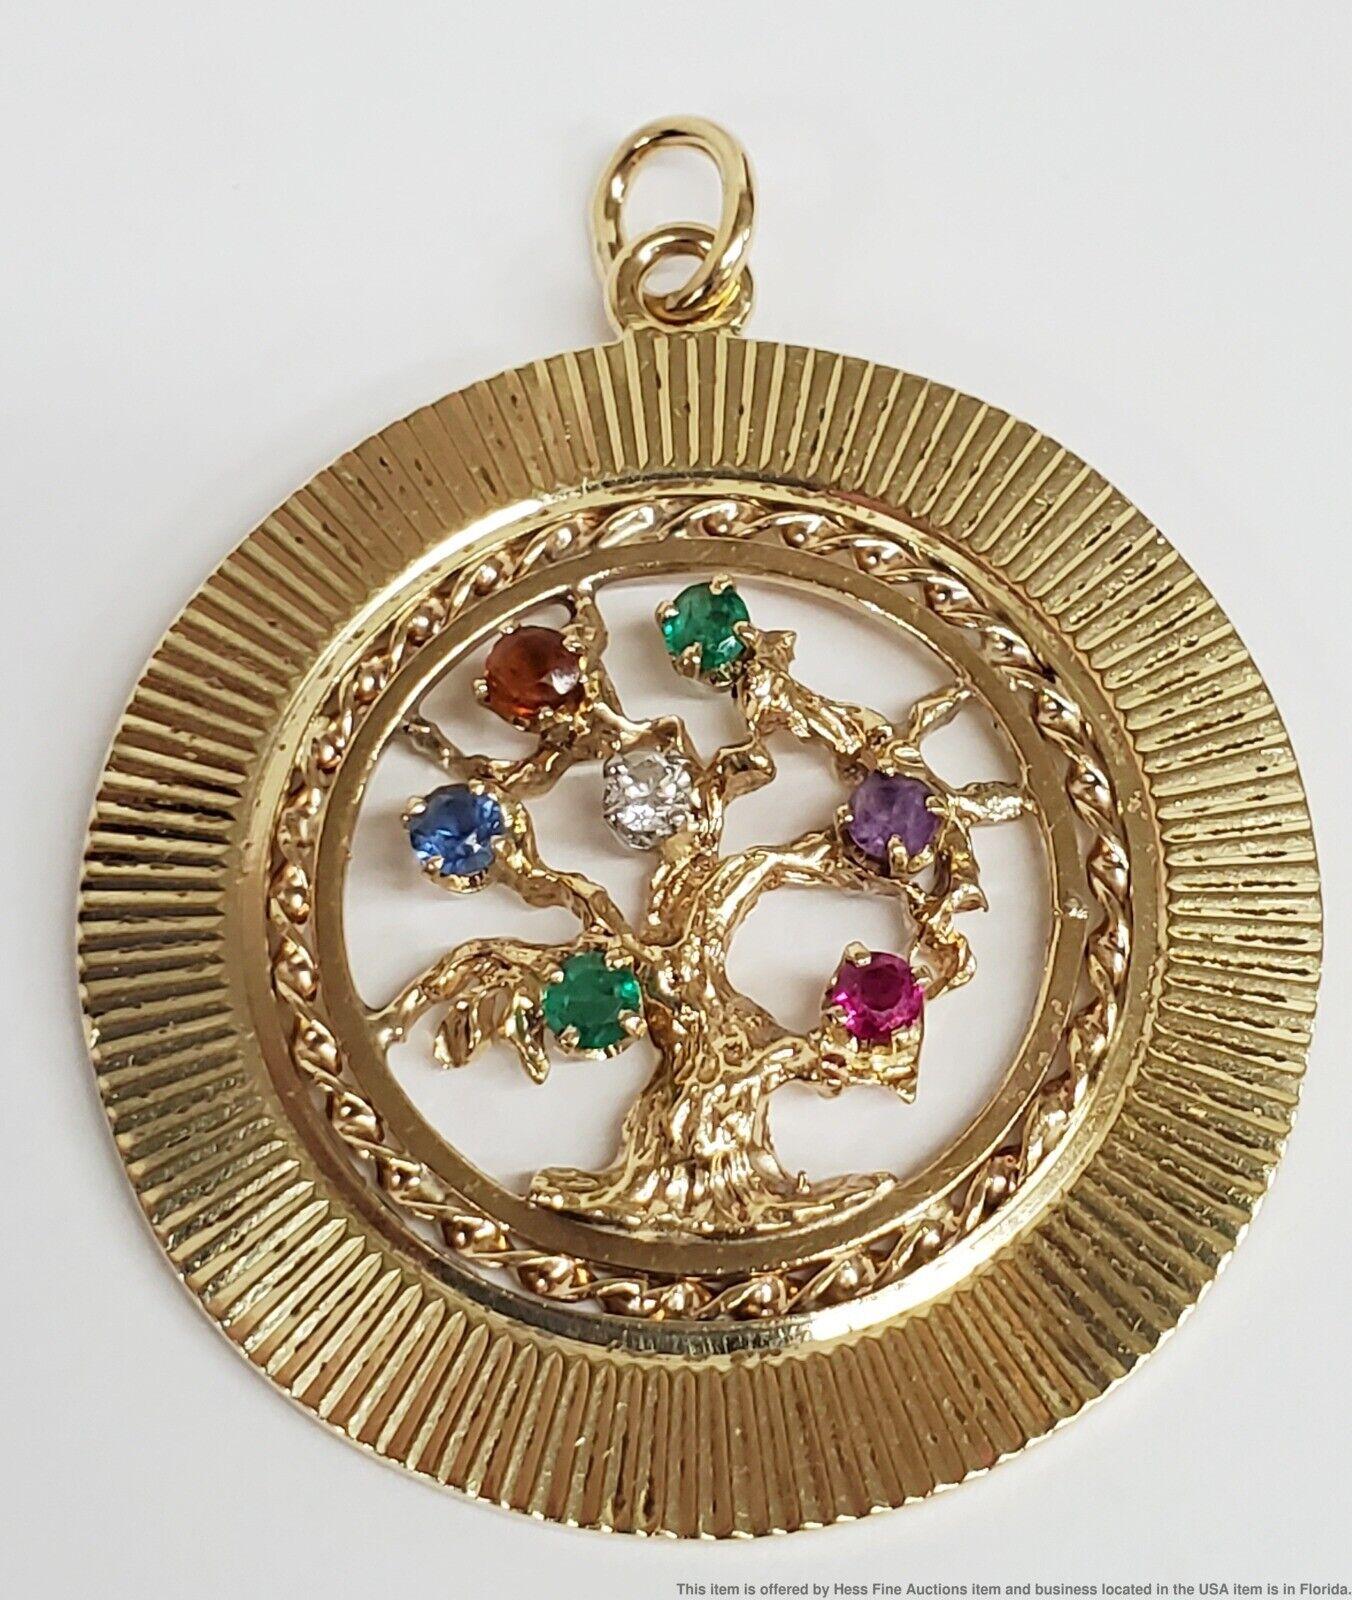 Tiffany & Co. Retro 14k Yellow Gold & Gemstone Tree of Life Pendant Charm Circa 1950s

Here is your chance to purchase a beautiful and highly collectible designer pendant.  Truly a great piece at a great price! 

Description: Tiffany & Co Natural